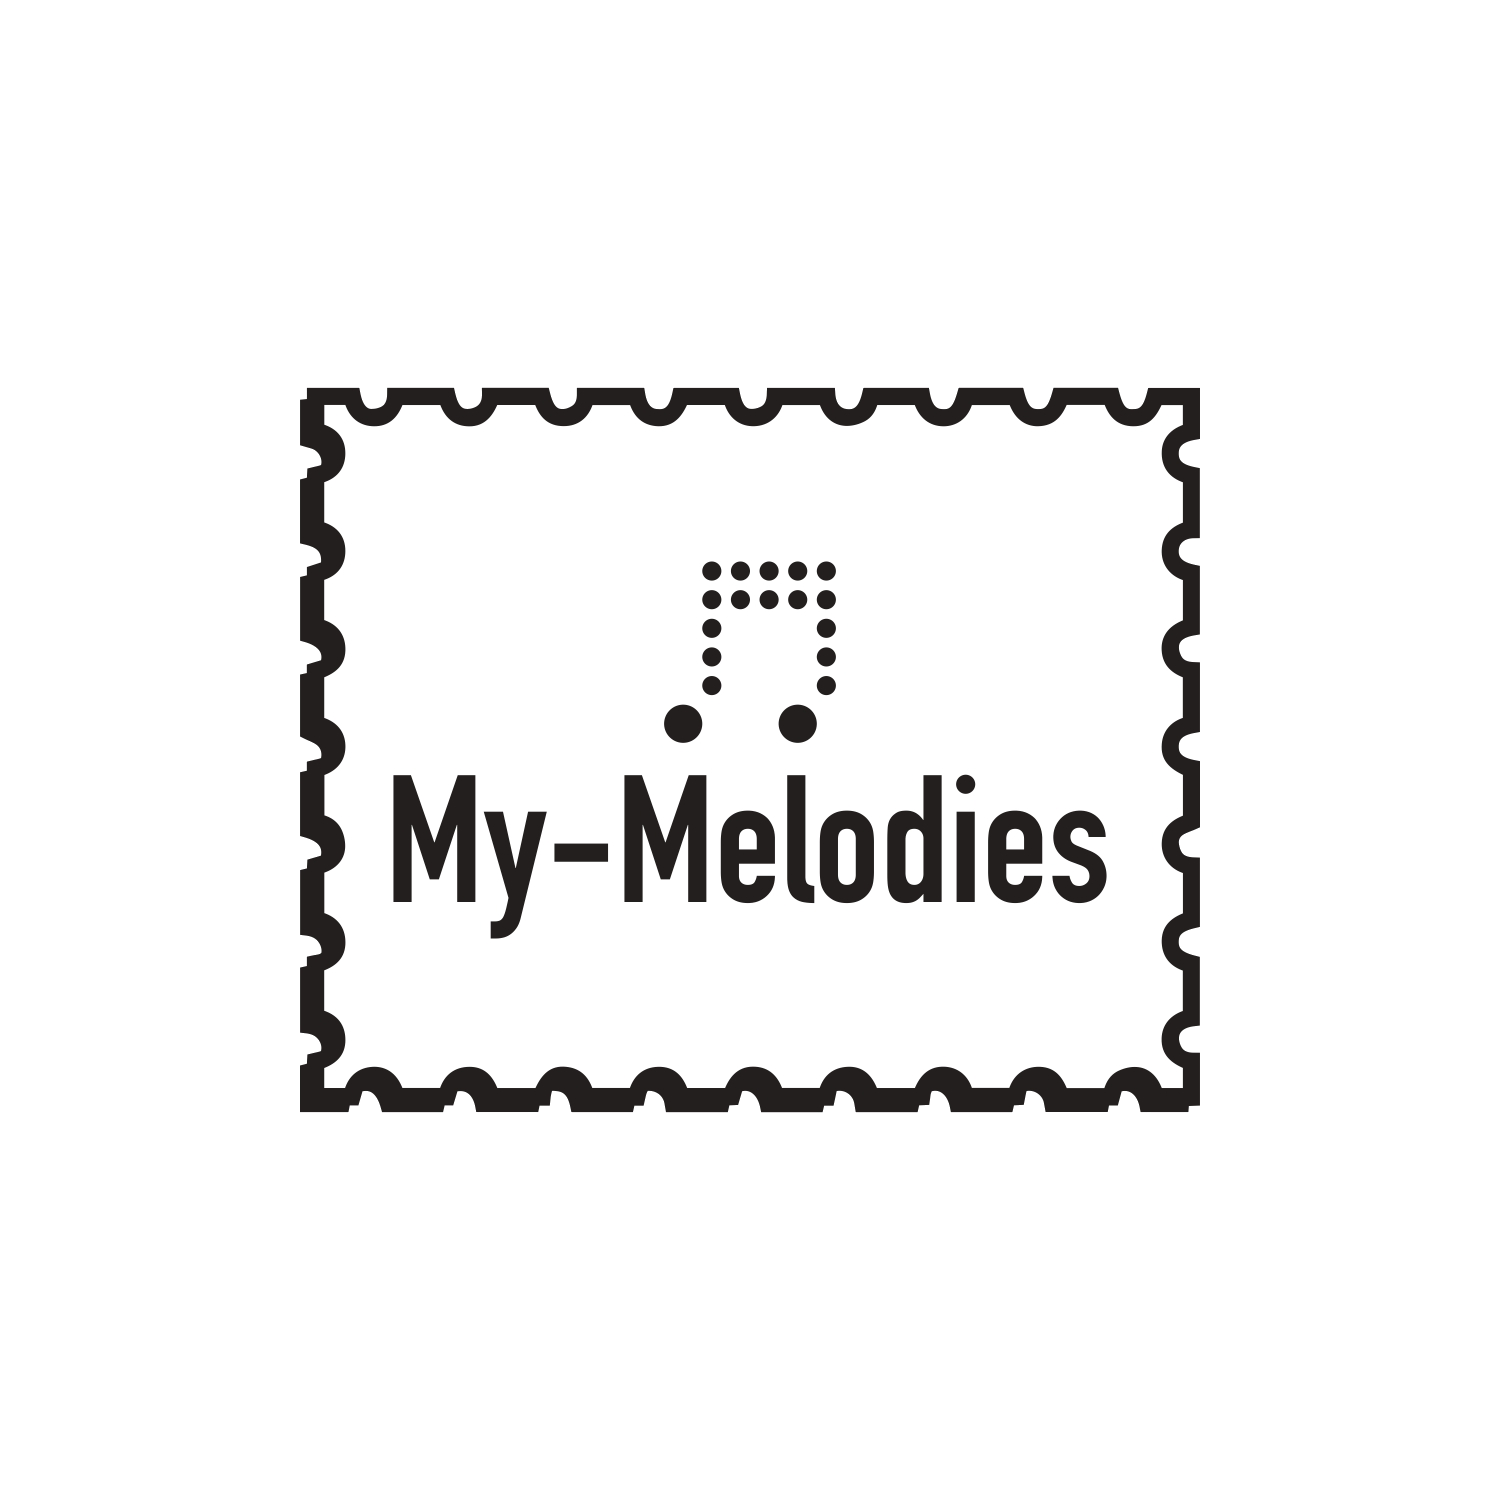 My-Melodies